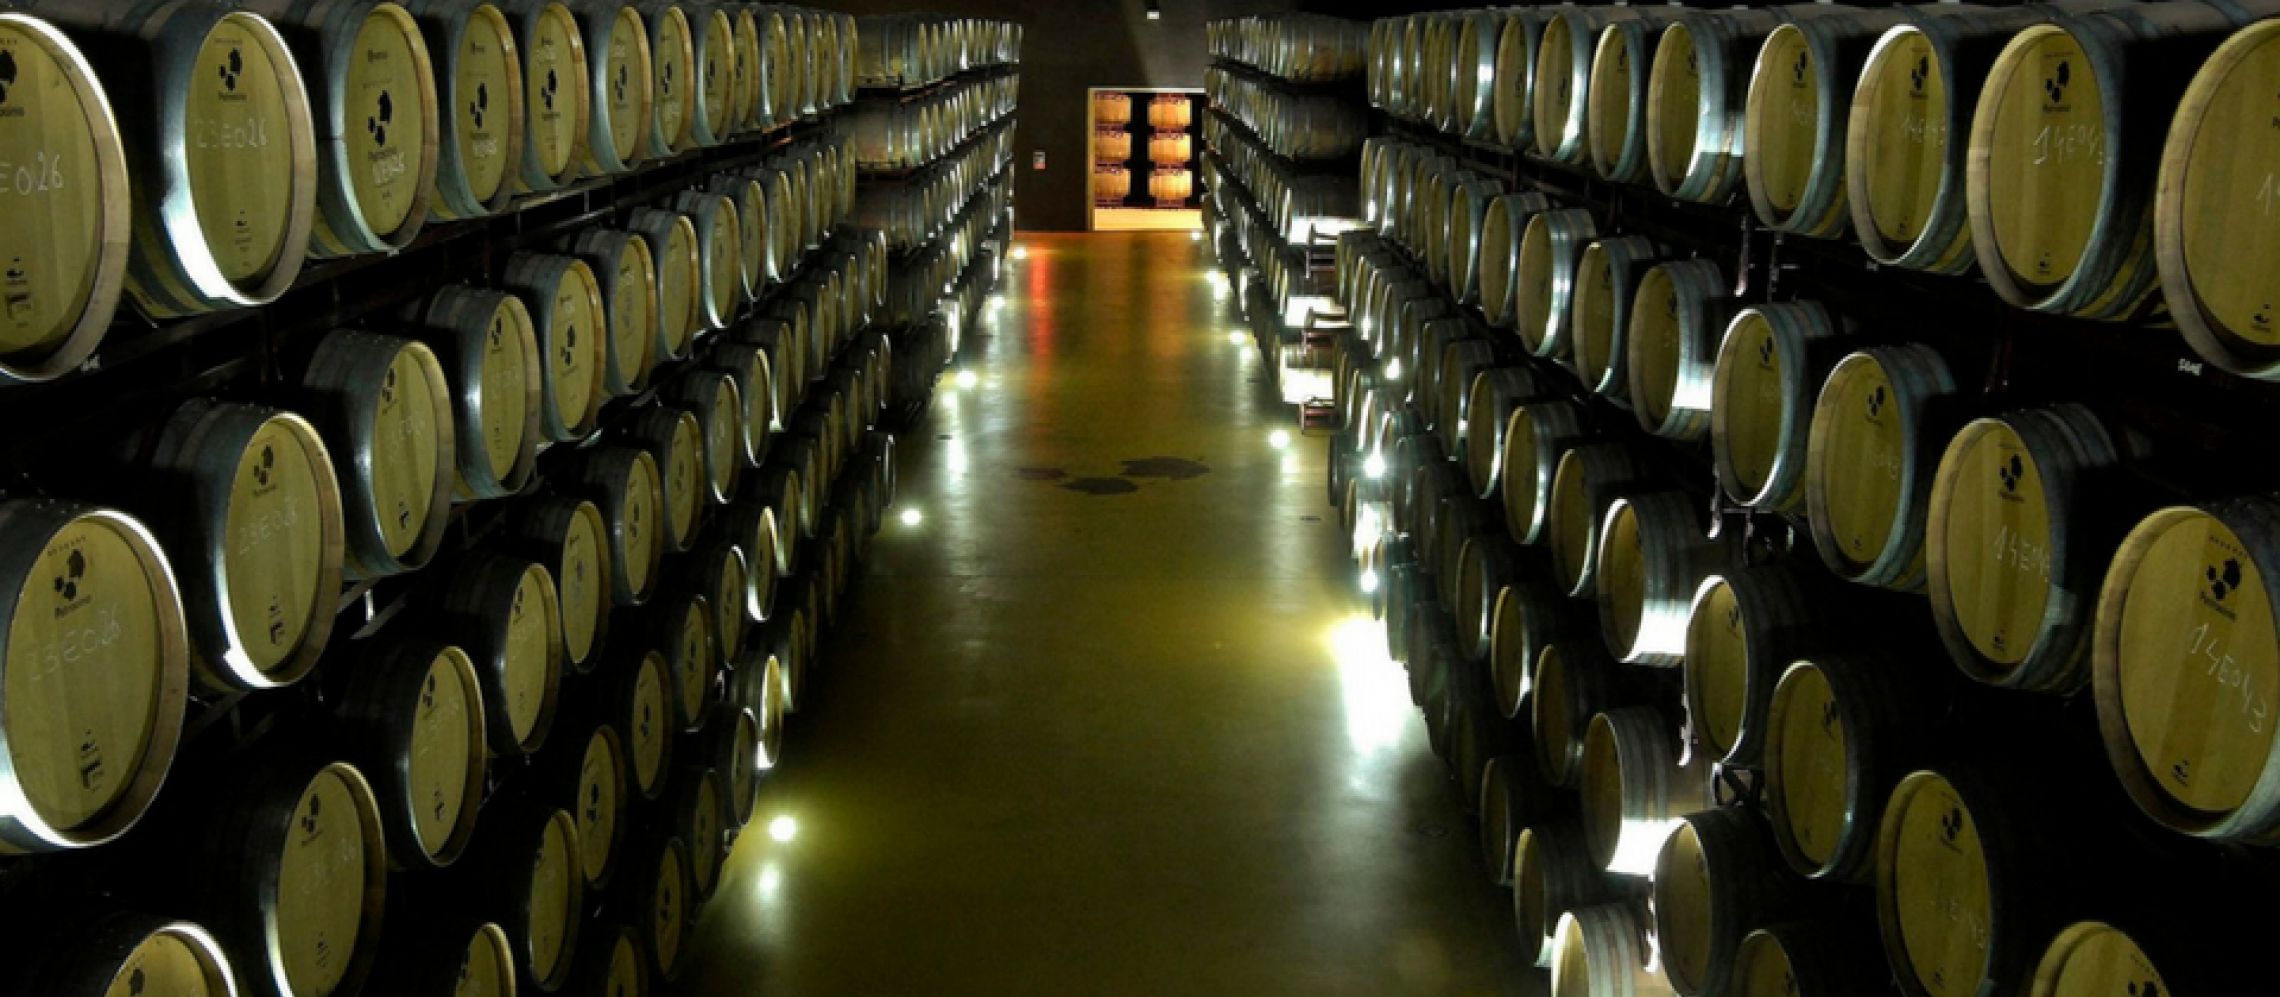 Photo for: Bodegas Patrocinio- A Co-Operative Winery in Spain